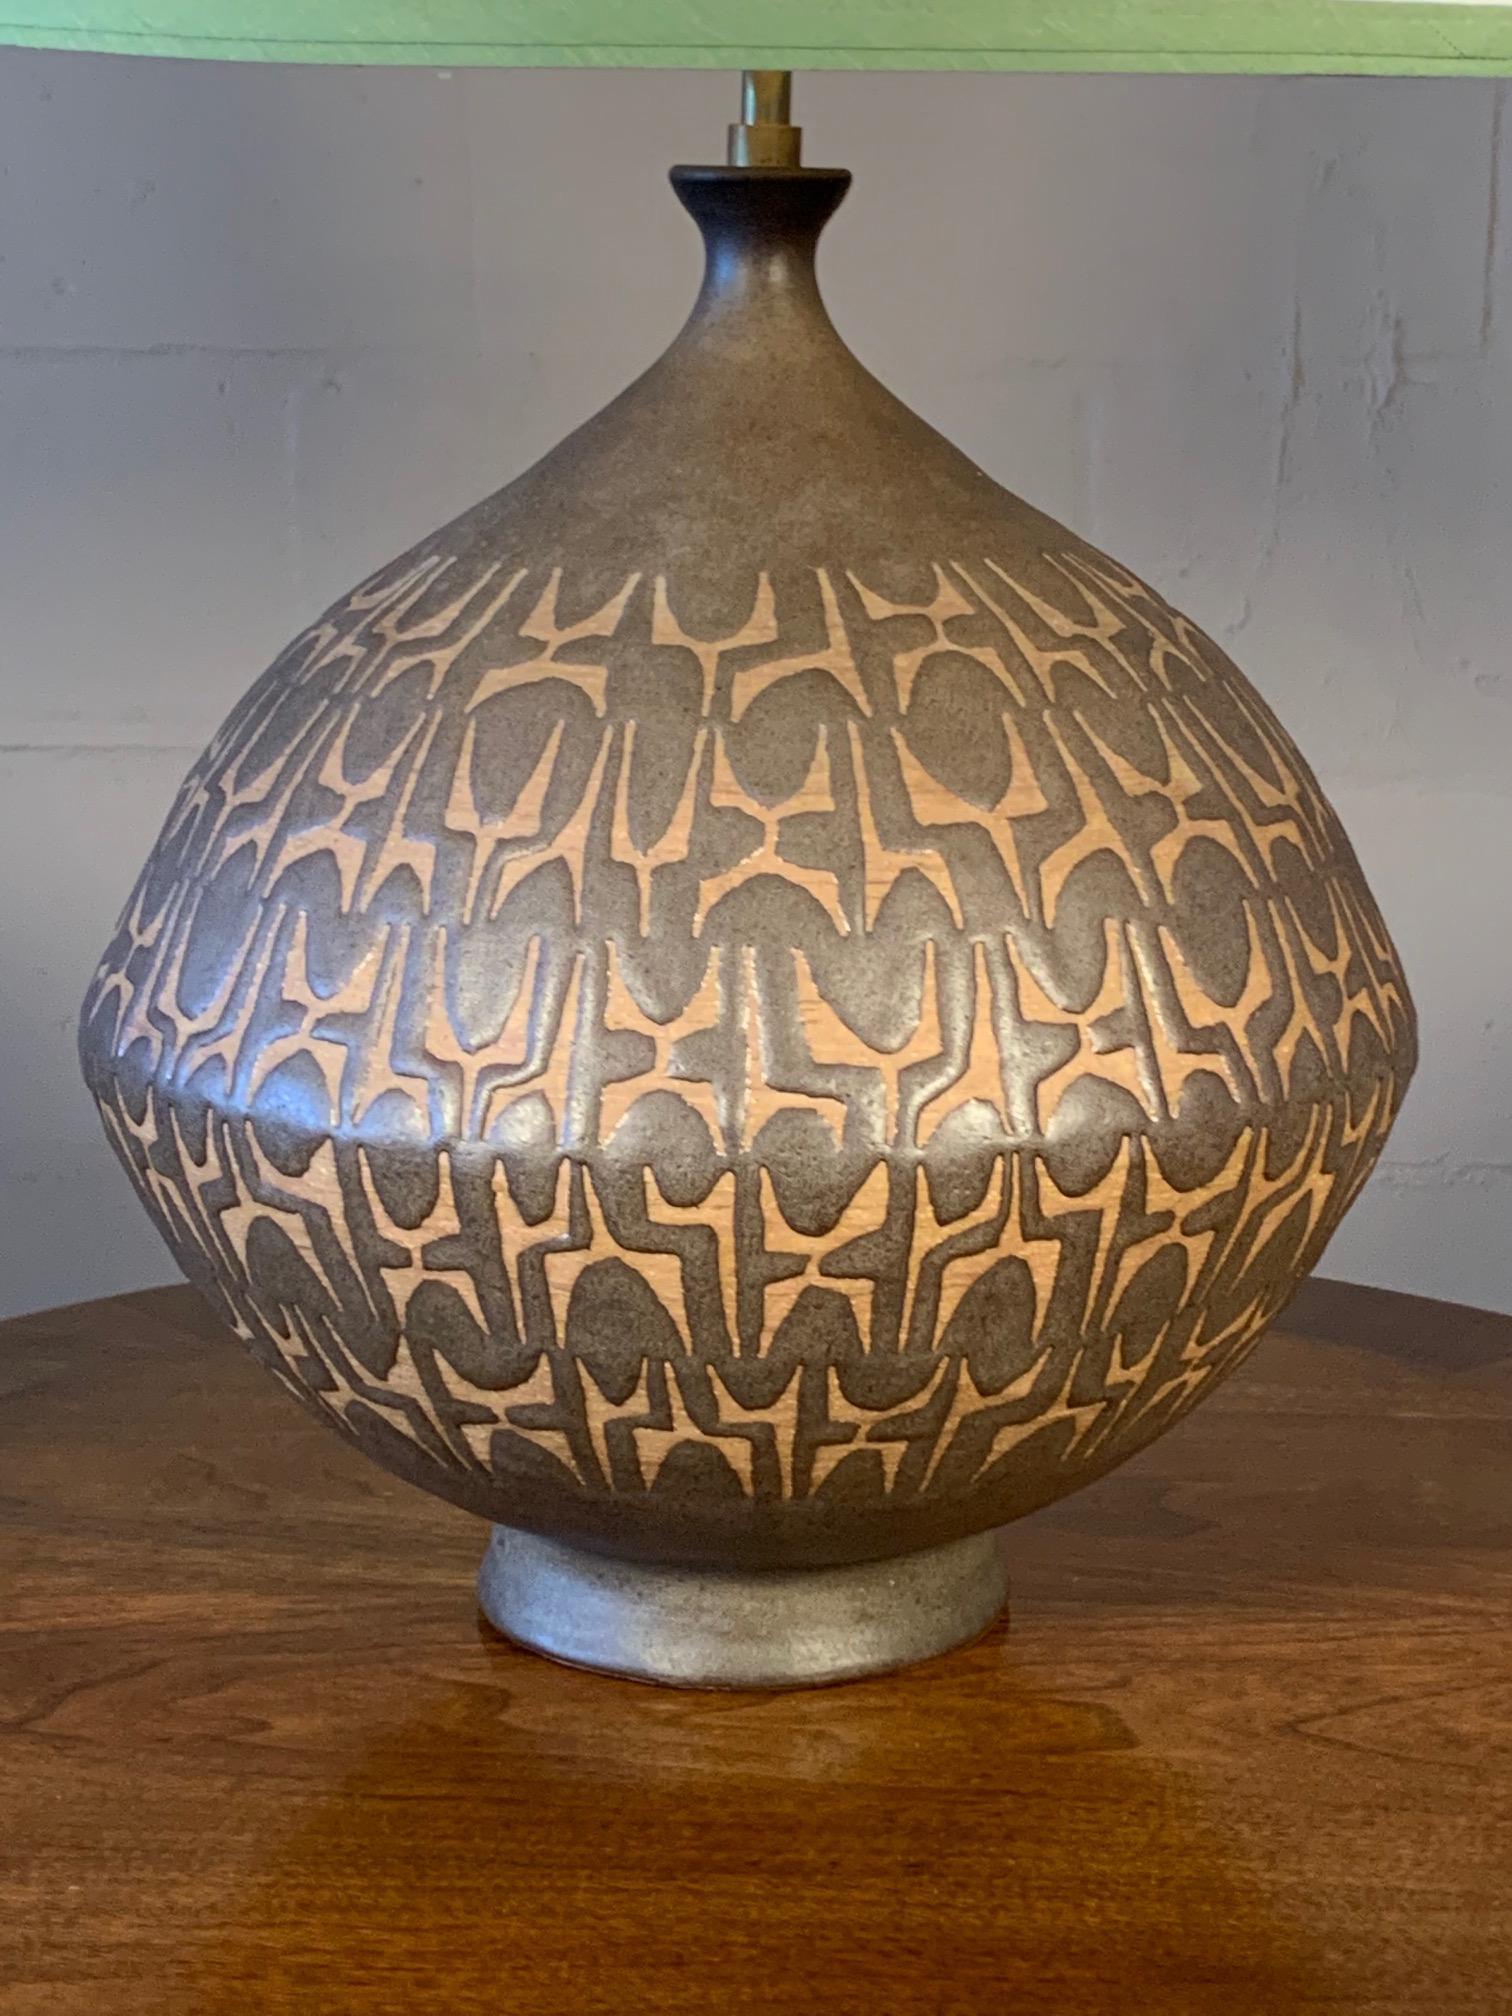 A monumental and heavy Clyde Burt ceramic lamp, signed on the inside, circa 1960s.